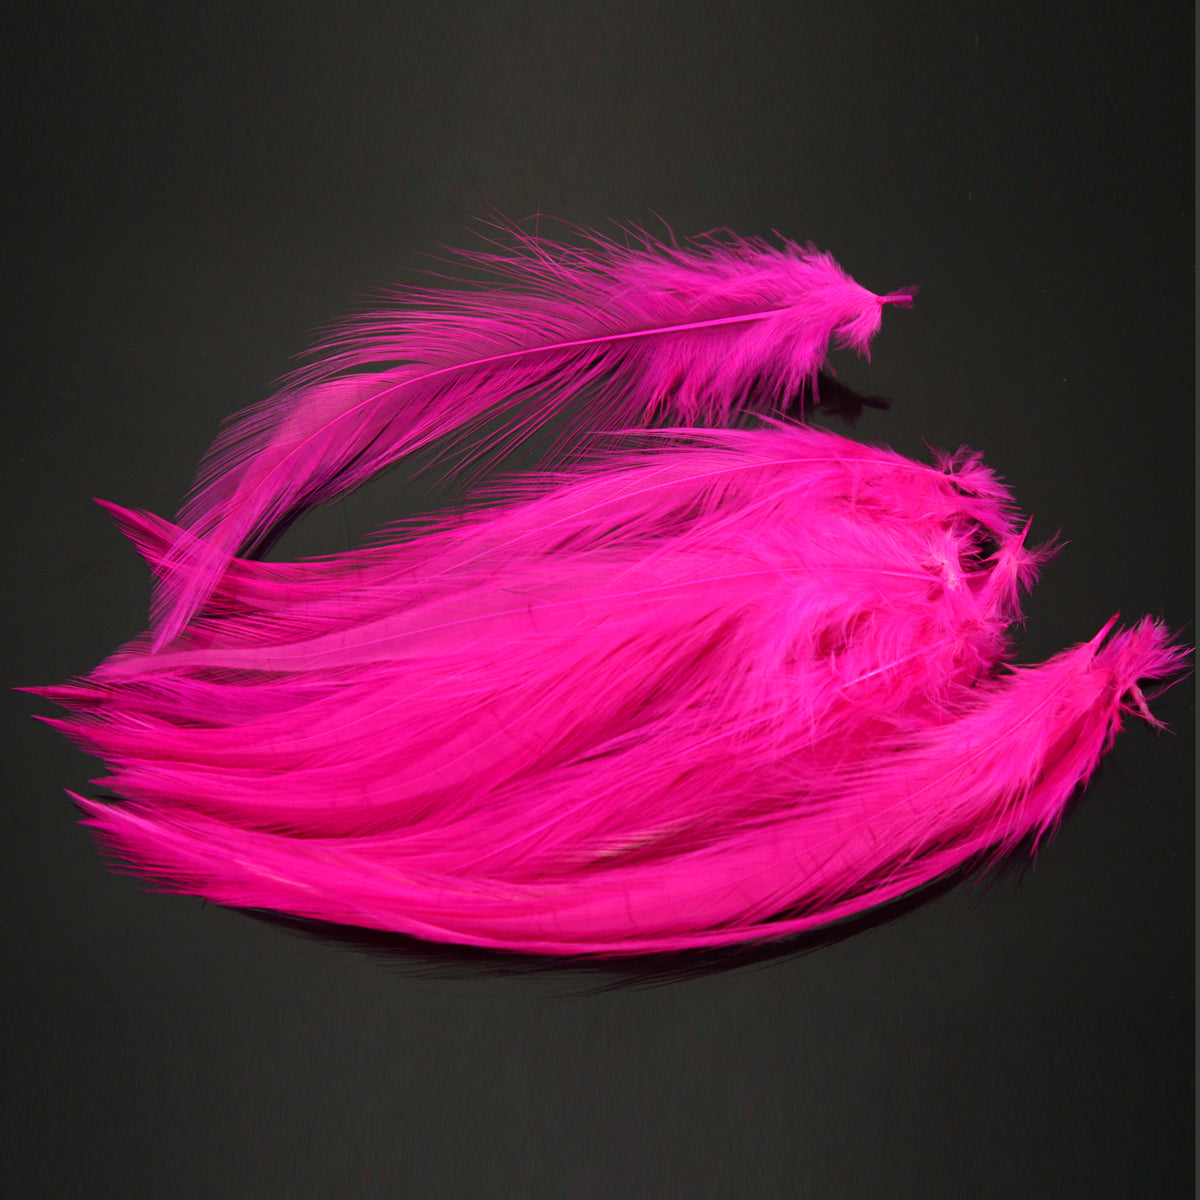 7-9 Inch Long Pink Feathers. Magenta Bird Quills for Making Costumes. Hot  Pink Rooster Tail Feathers for Halloween Masks and Hair Braids 